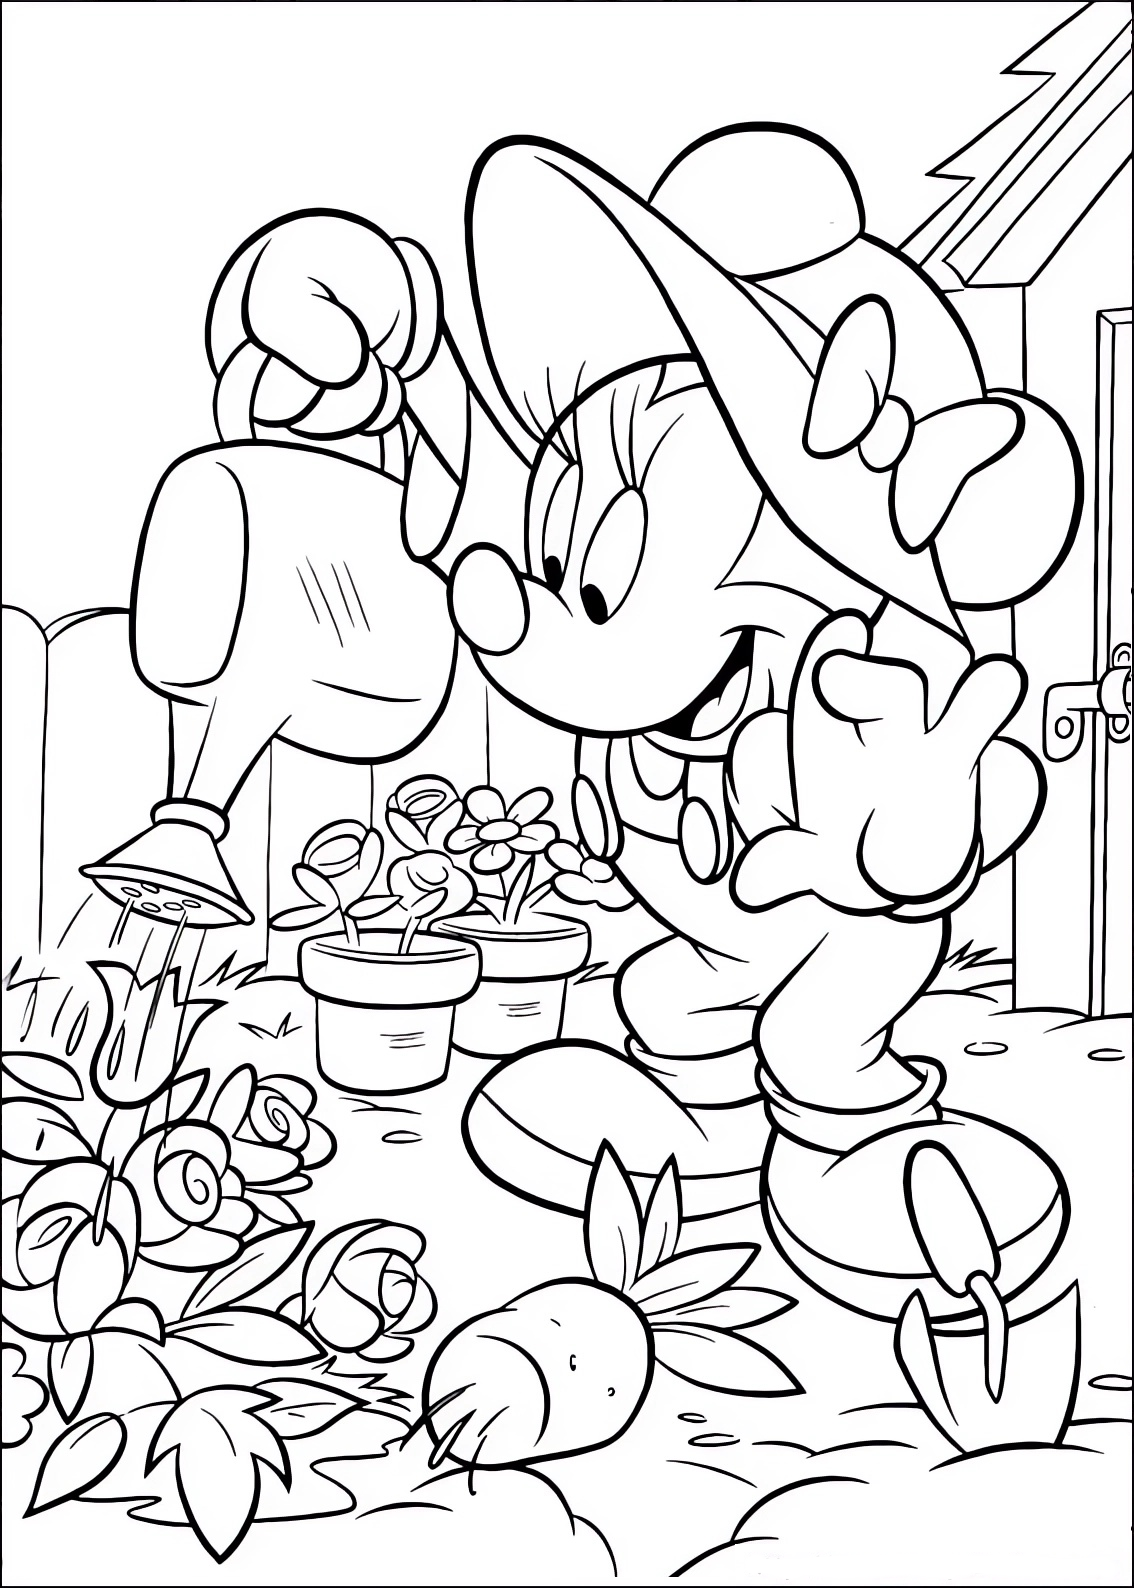 Coloring page of Minnie watering the flowers